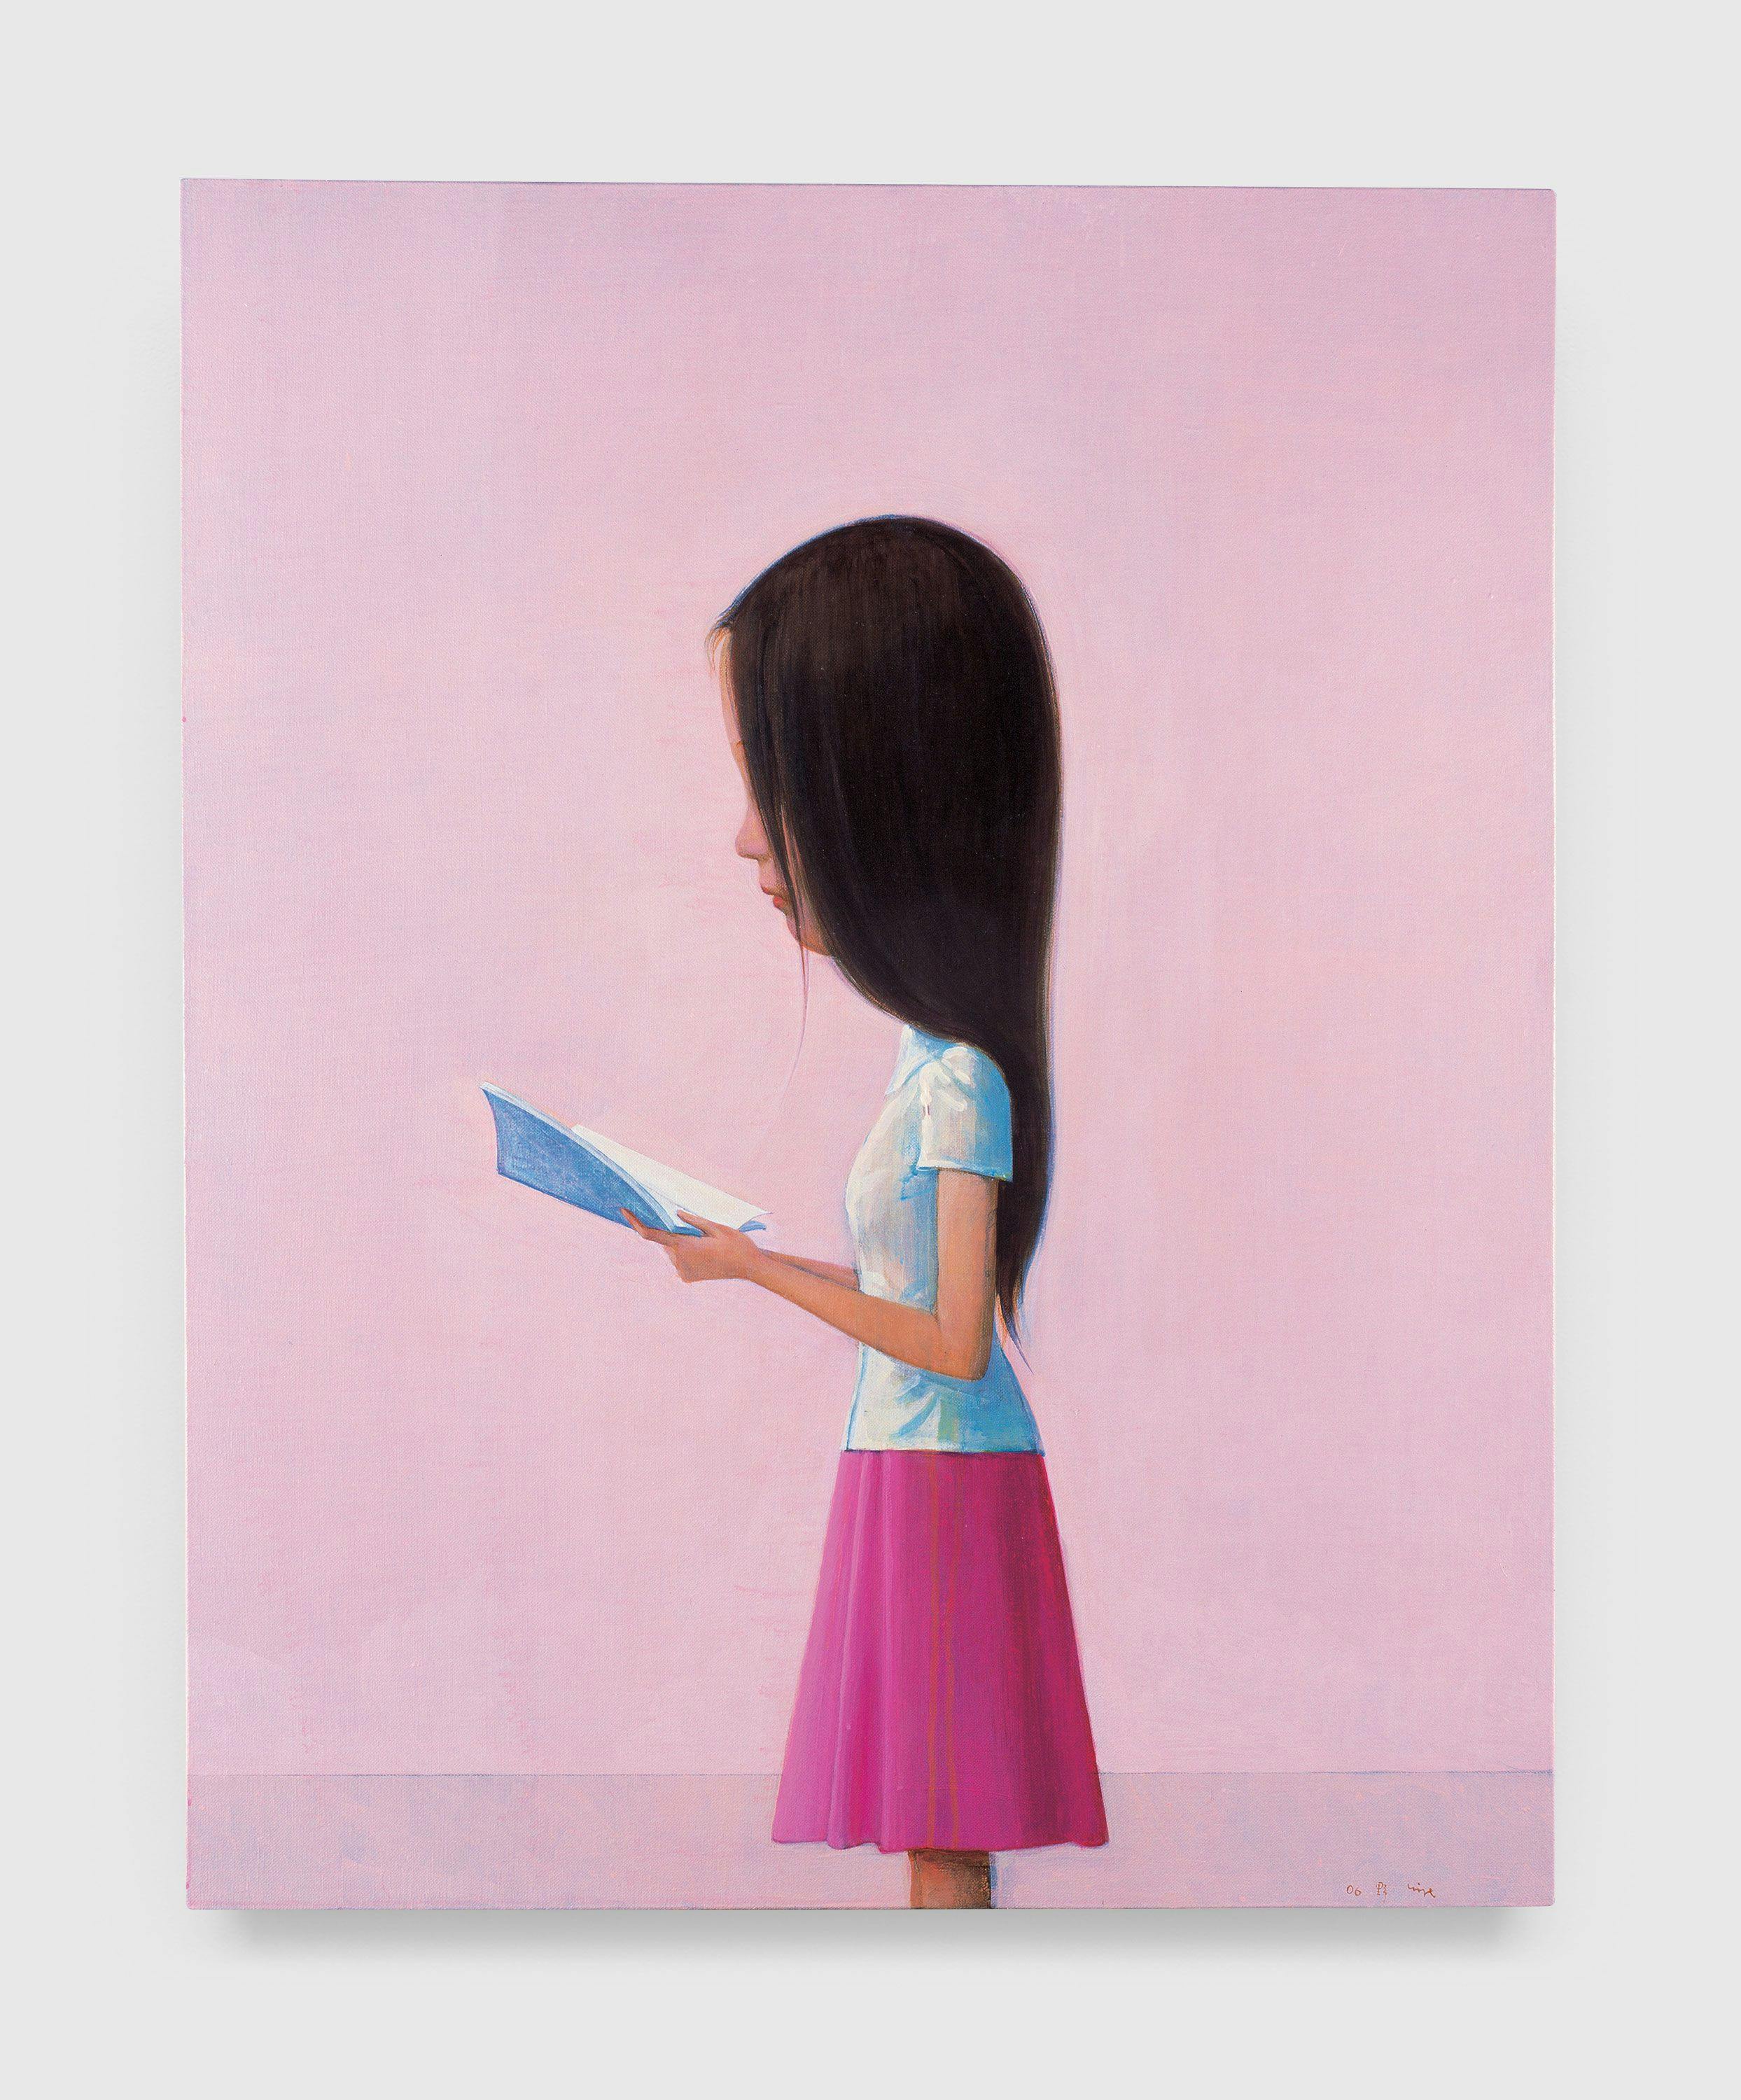 A painting by Liu Ye, titled Banned Book No.1, dated 2006.